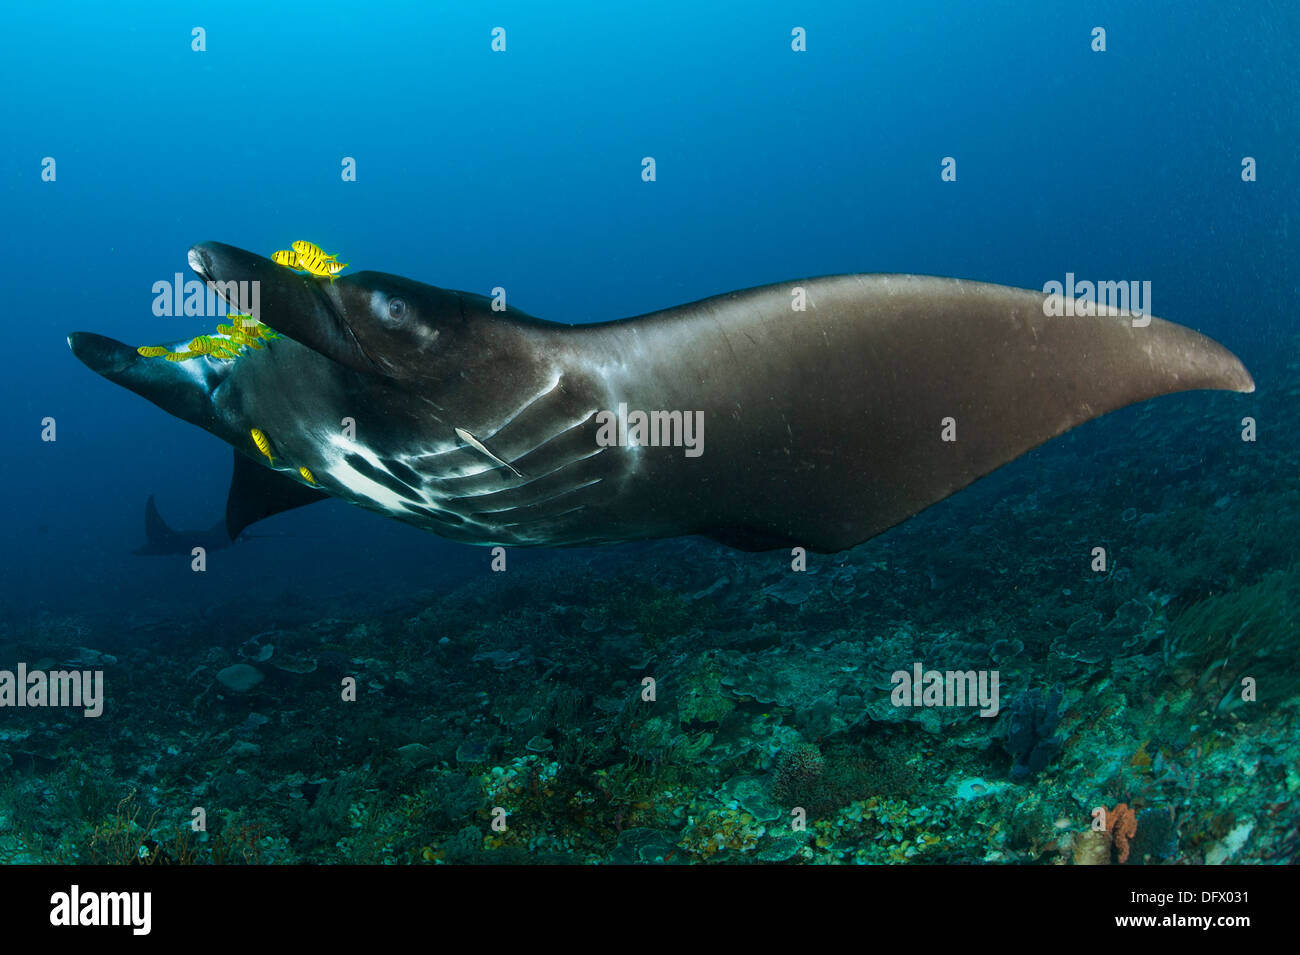 The reef manta ray with yellow pilot fish in front of its mouth. Stock Photo